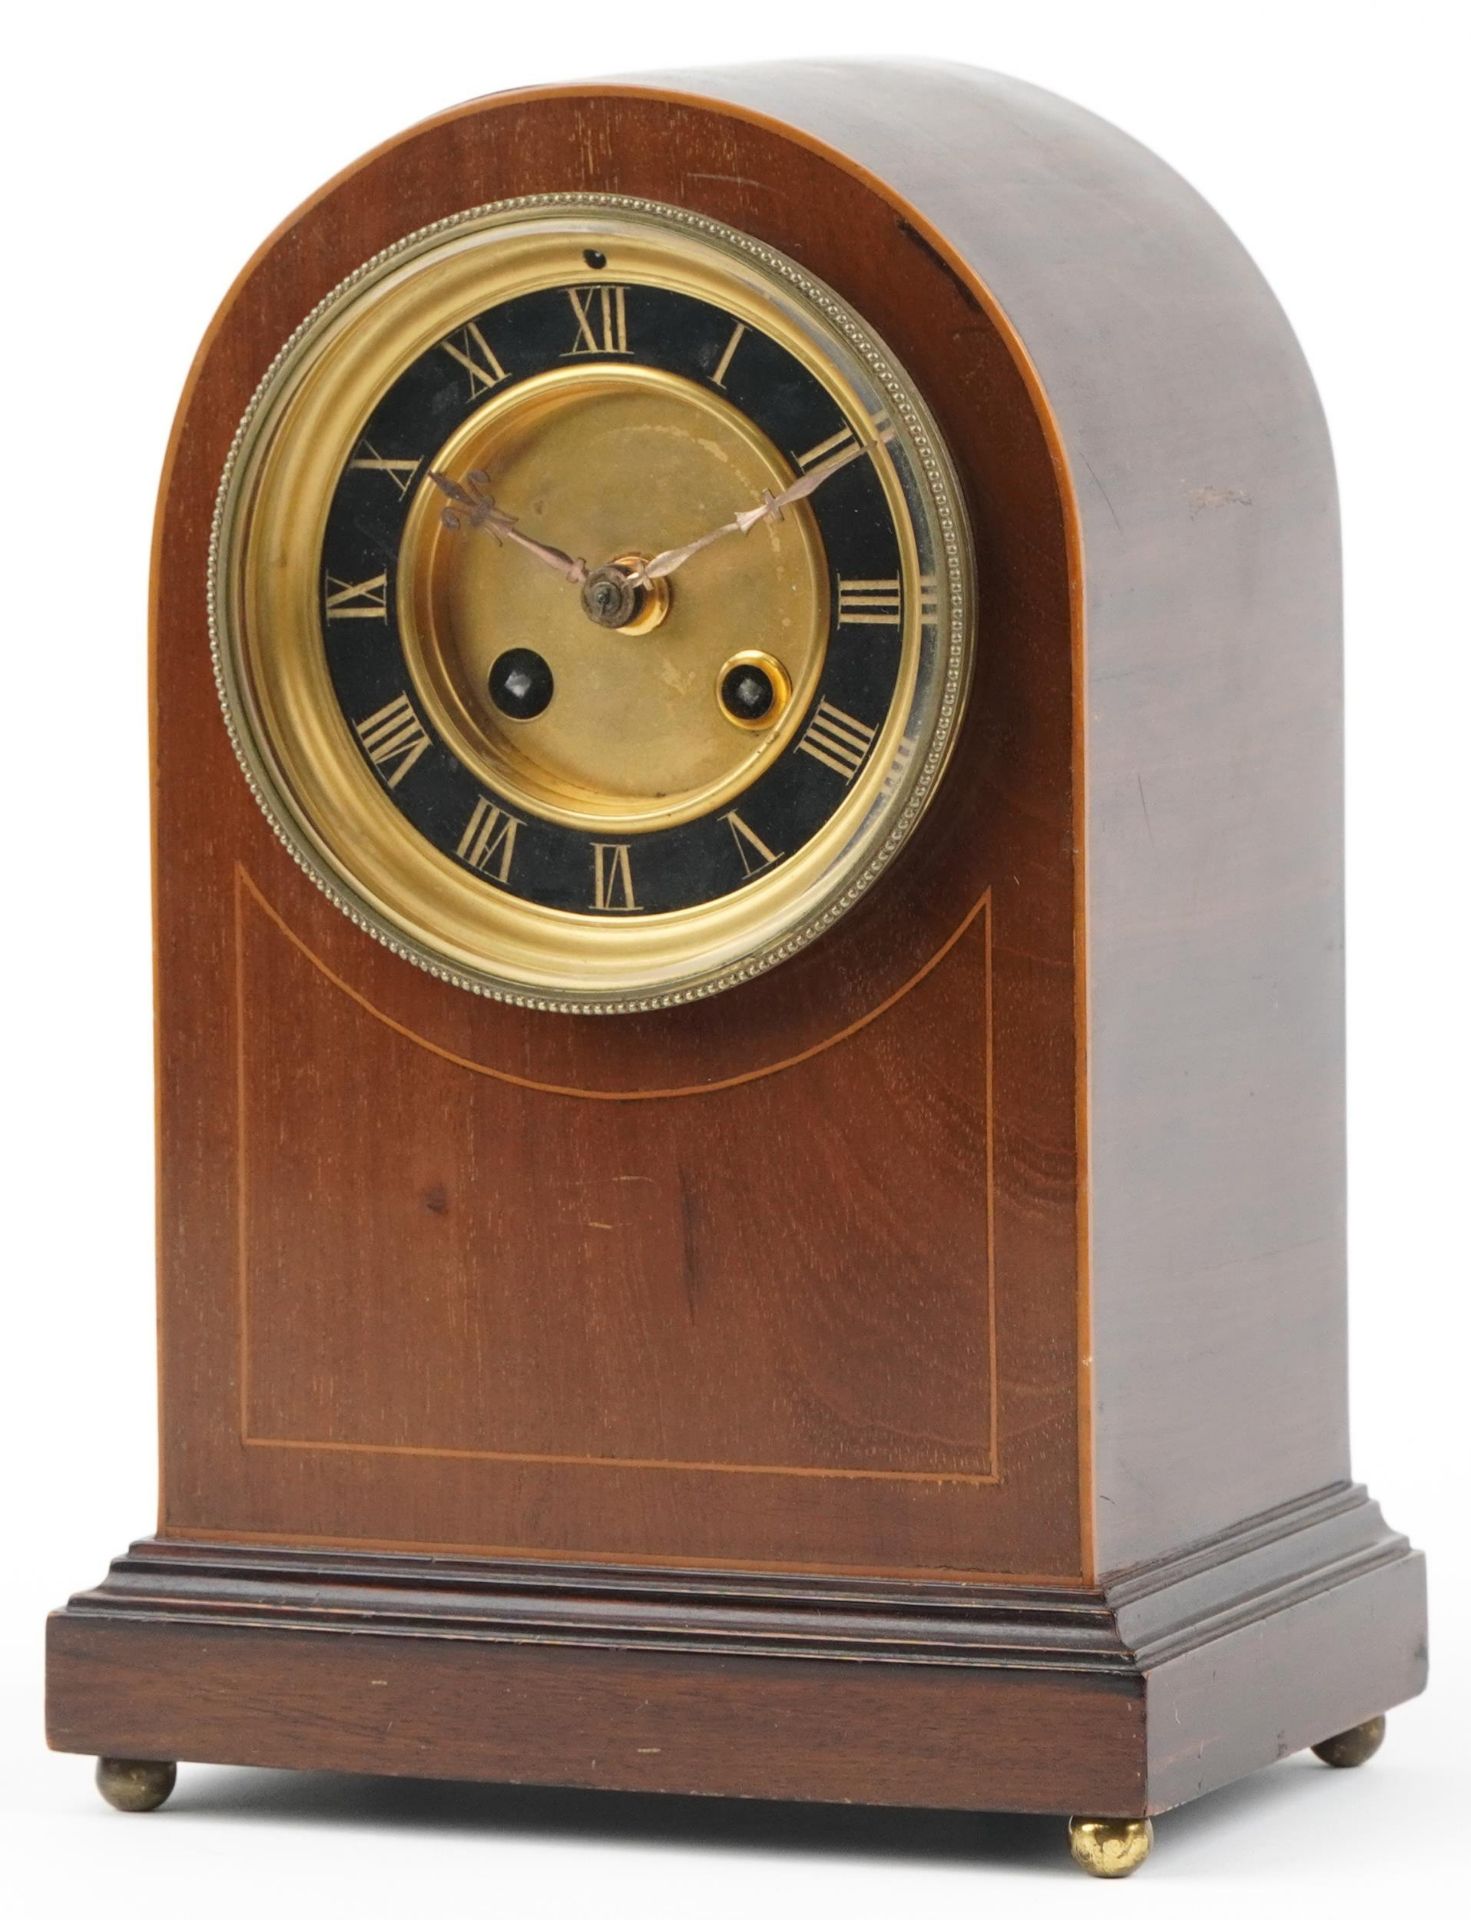 Edwardian inlaid mahogany dome top mantle clock with painted chapter ring having Roman numerals,